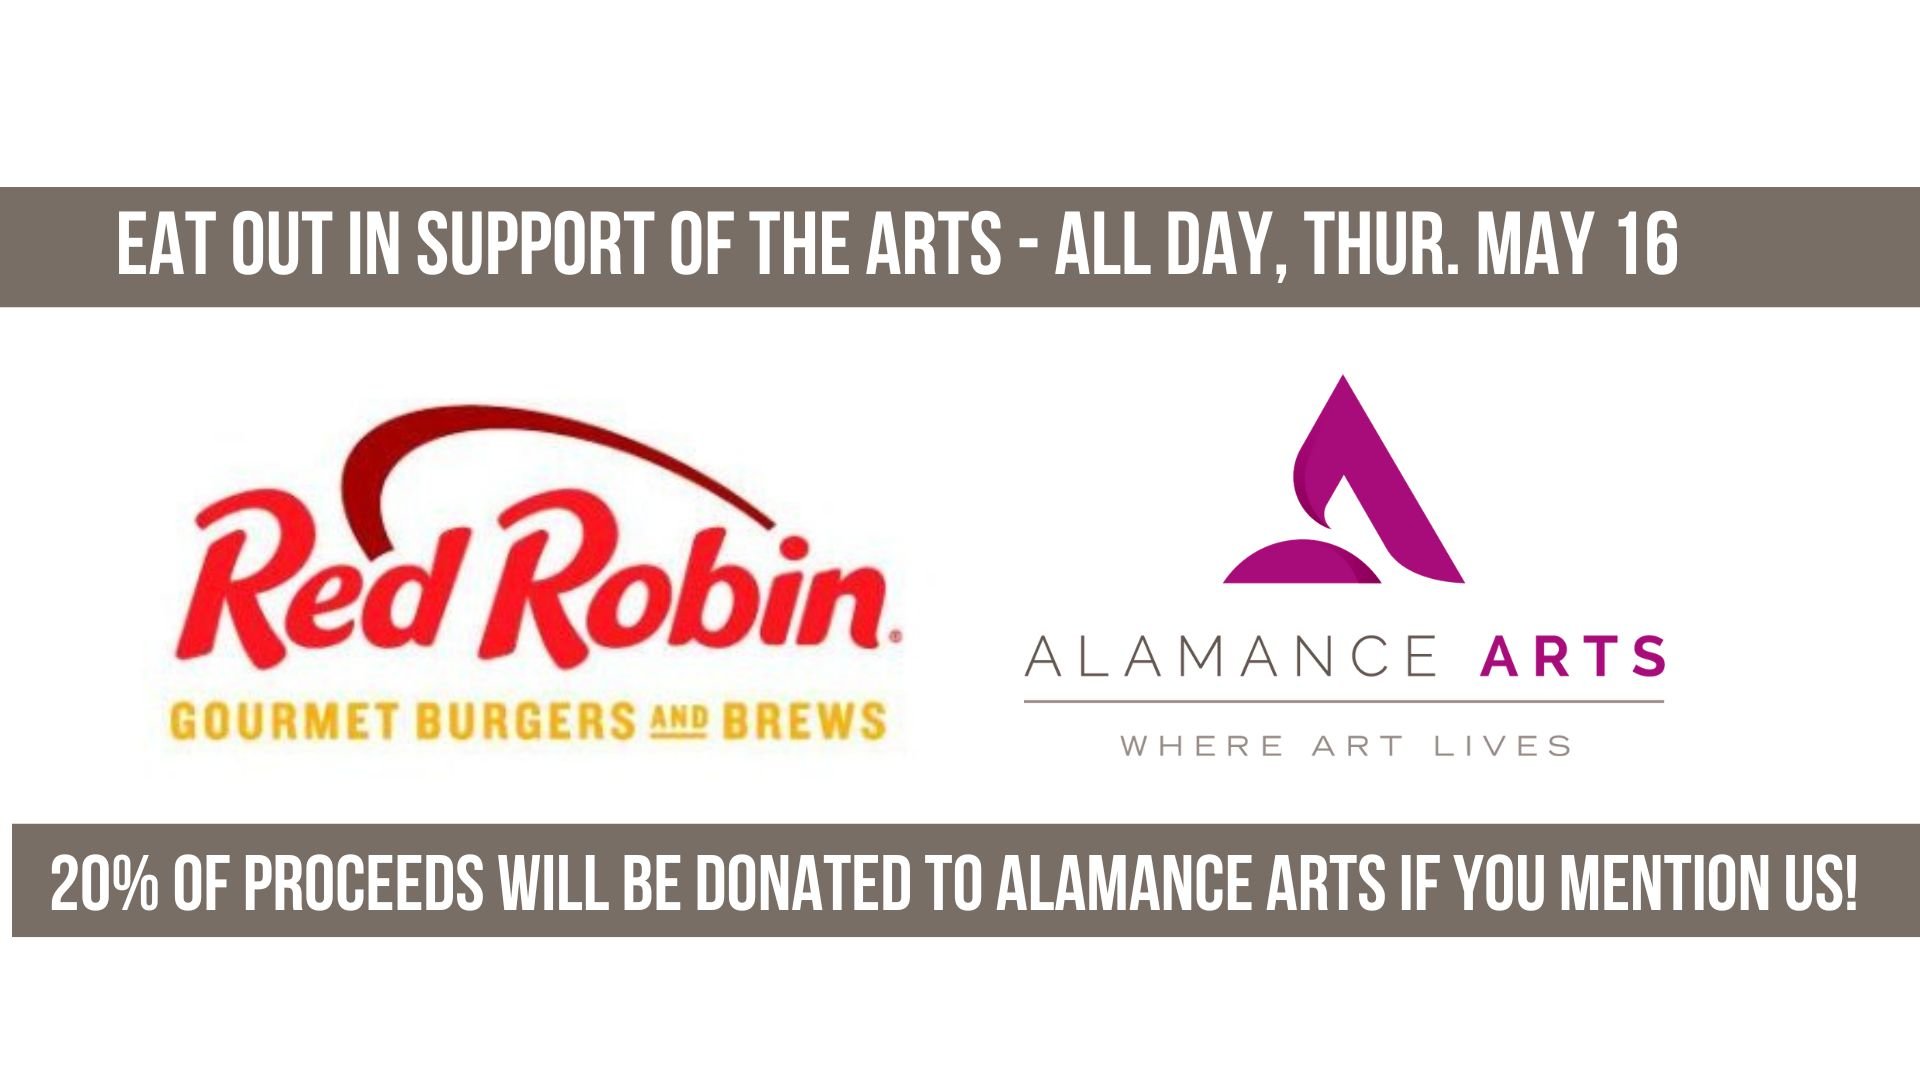 Eat Out in Support of The Arts.jpg